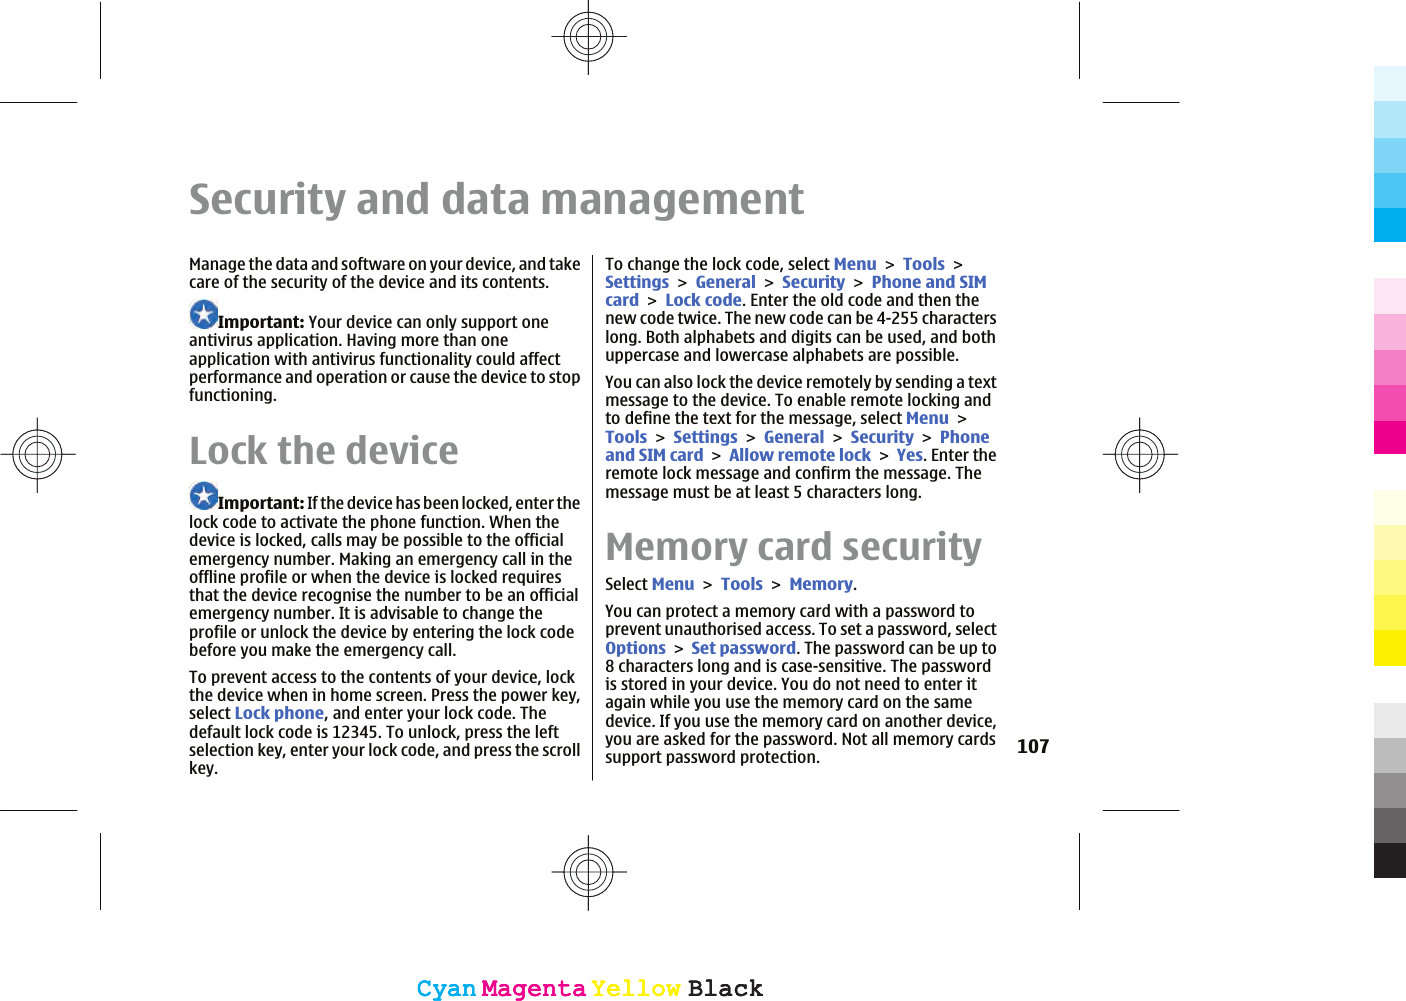 Security and data managementManage the data and software on your device, and takecare of the security of the device and its contents.Important: Your device can only support oneantivirus application. Having more than oneapplication with antivirus functionality could affectperformance and operation or cause the device to stopfunctioning.Lock the deviceImportant: If the device has been locked, enter thelock code to activate the phone function. When thedevice is locked, calls may be possible to the officialemergency number. Making an emergency call in theoffline profile or when the device is locked requiresthat the device recognise the number to be an officialemergency number. It is advisable to change theprofile or unlock the device by entering the lock codebefore you make the emergency call.To prevent access to the contents of your device, lockthe device when in home screen. Press the power key,select Lock phone, and enter your lock code. Thedefault lock code is 12345. To unlock, press the leftselection key, enter your lock code, and press the scrollkey.To change the lock code, select MenuToolsSettingsGeneralSecurityPhone and SIMcardLock code. Enter the old code and then thenew code twice. The new code can be 4-255 characterslong. Both alphabets and digits can be used, and bothuppercase and lowercase alphabets are possible.You can also lock the device remotely by sending a textmessage to the device. To enable remote locking andto define the text for the message, select MenuToolsSettingsGeneralSecurityPhoneand SIM cardAllow remote lockYes. Enter theremote lock message and confirm the message. Themessage must be at least 5 characters long.Memory card securitySelect MenuToolsMemory.You can protect a memory card with a password toprevent unauthorised access. To set a password, selectOptionsSet password. The password can be up to8 characters long and is case-sensitive. The passwordis stored in your device. You do not need to enter itagain while you use the memory card on the samedevice. If you use the memory card on another device,you are asked for the password. Not all memory cardssupport password protection. 107CyanCyanMagentaMagentaYellowYellowBlackBlackCyanCyanMagentaMagentaYellowYellowBlackBlack